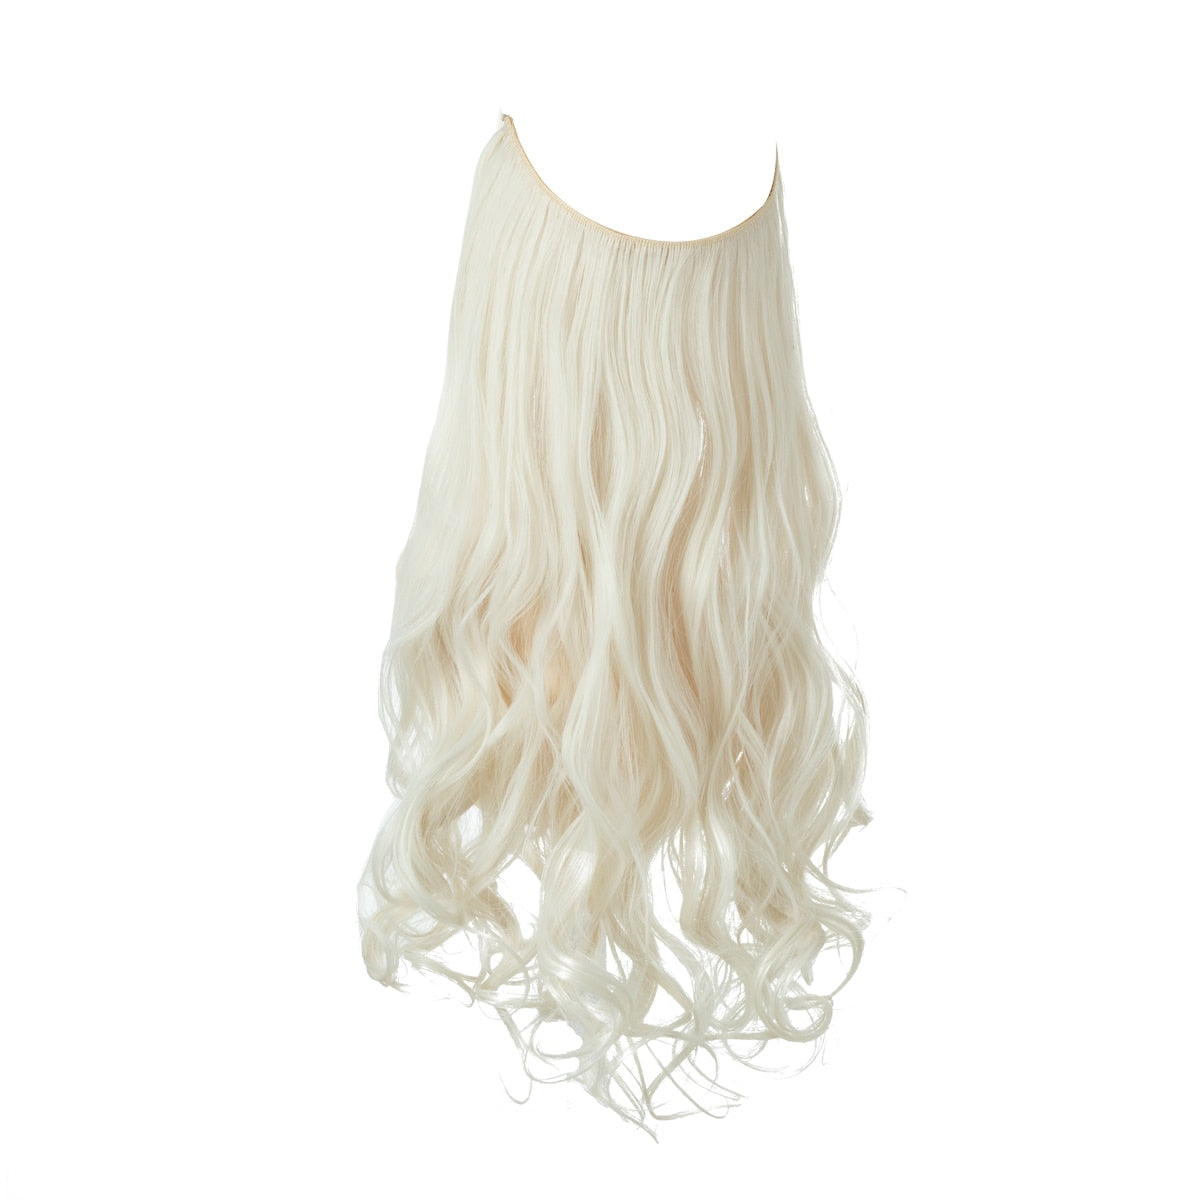 TEEK - Invisible Synth No Clip No Comb Wave Hair Extensions | Blonde Shades HAIR theteekdotcom Platinum Blonde 14inches 20-22 days